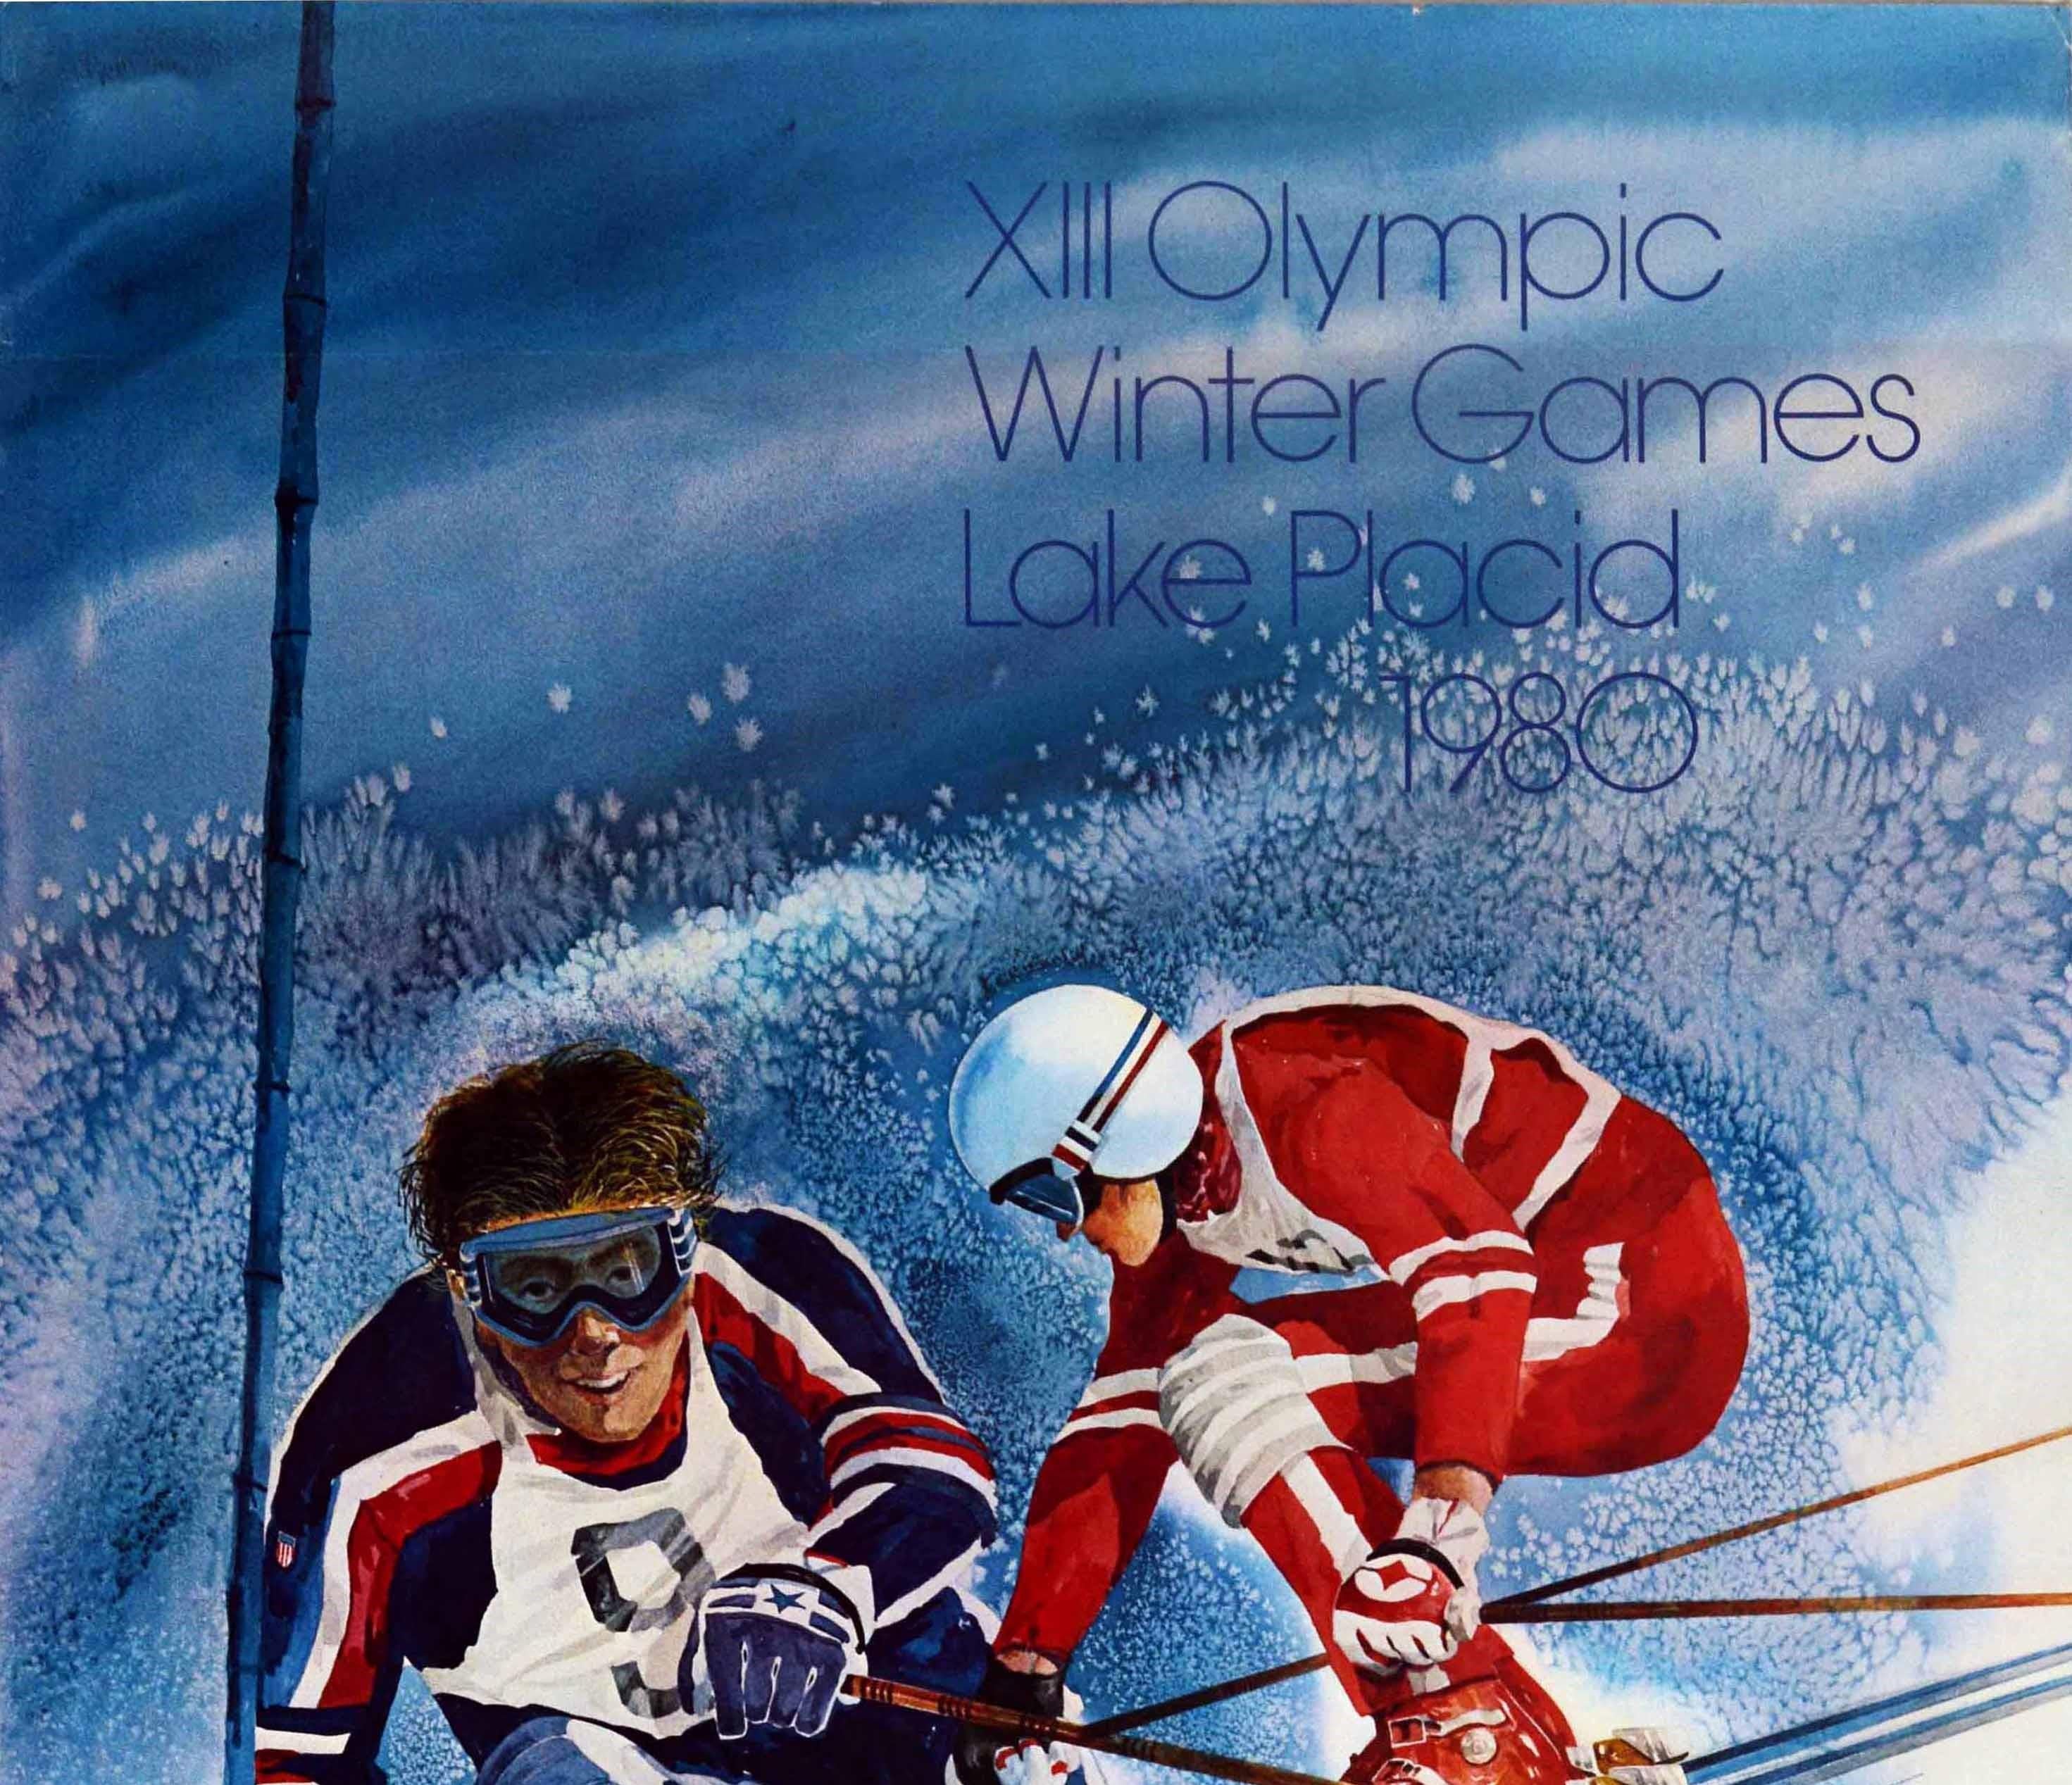 Original vintage sport advertising poster for the XIII Olympic Winter Games Lake Placid 1980 held in New York USA from 13-24 February featuring a dynamic illustration of two skiers in red blue and white ski suits with one skiing at speed on a slalom